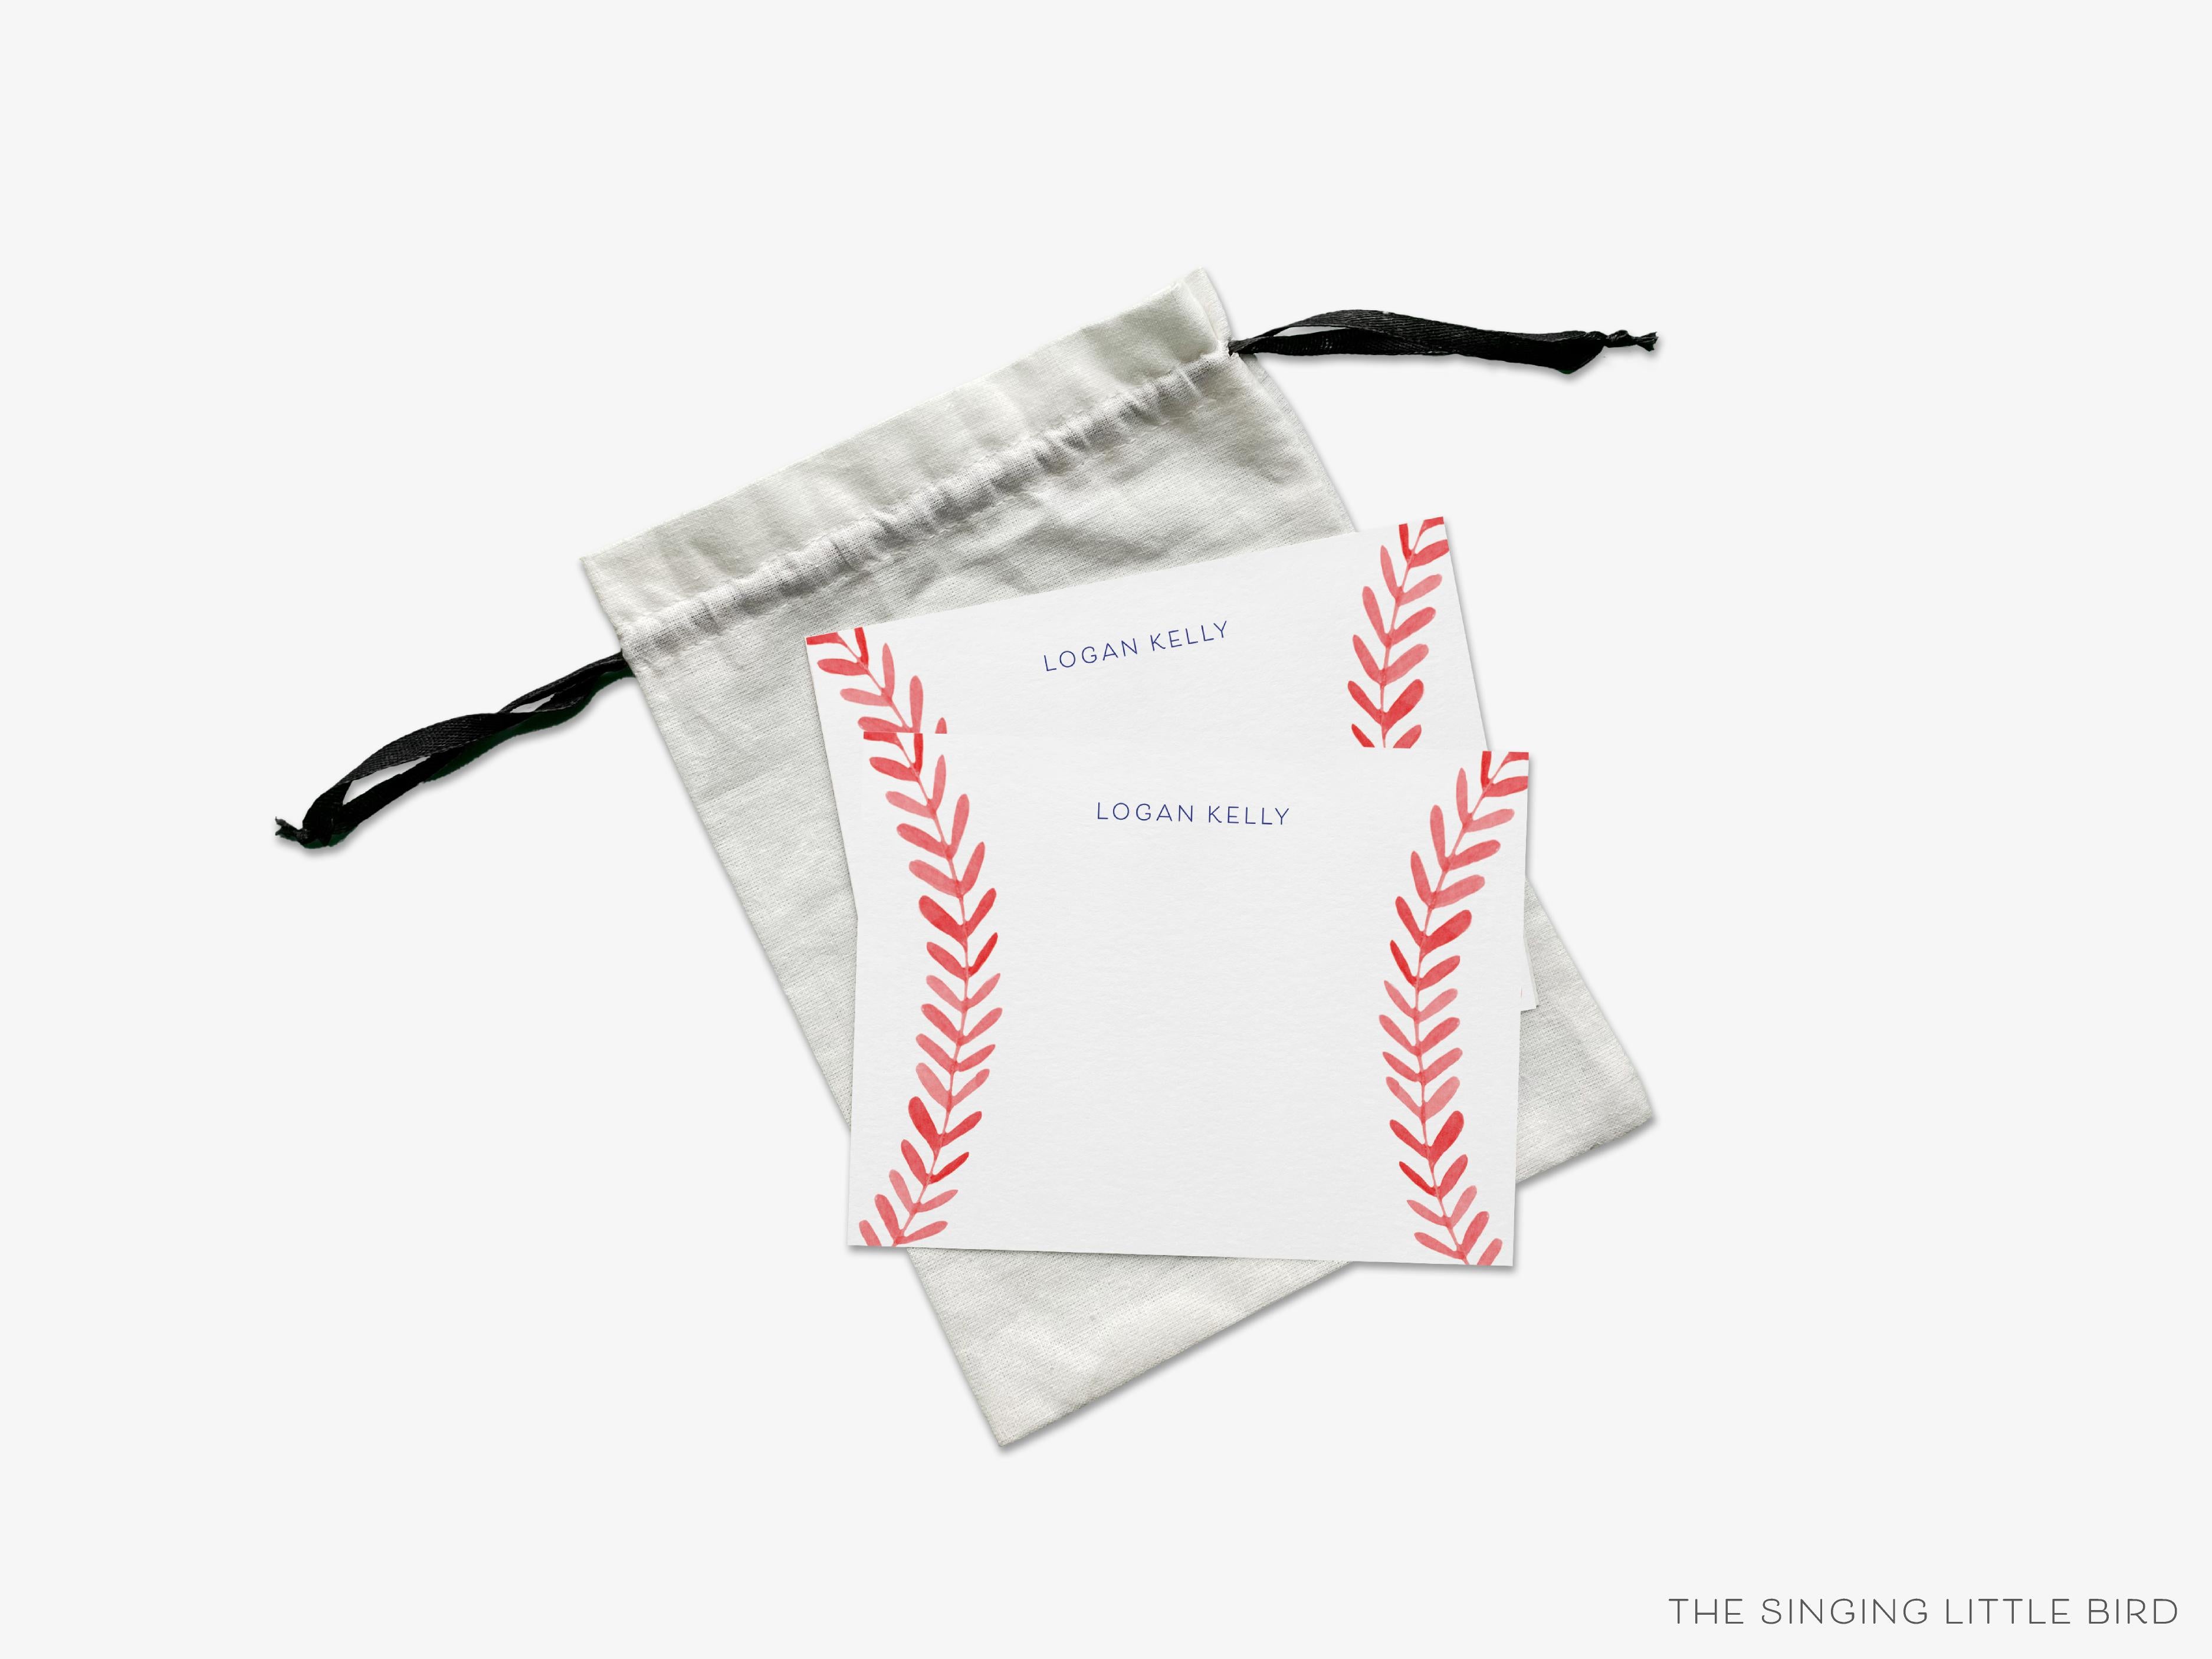 Personalized Baseball Seams Flat Notes-These personalized flat notecards are 4.25x5.5 and feature our hand-painted watercolor baseball seams, printed in the USA on 120lb textured stock. They come with your choice of envelopes and make great thank yous and gifts for the baseball lover in your life.-The Singing Little Bird